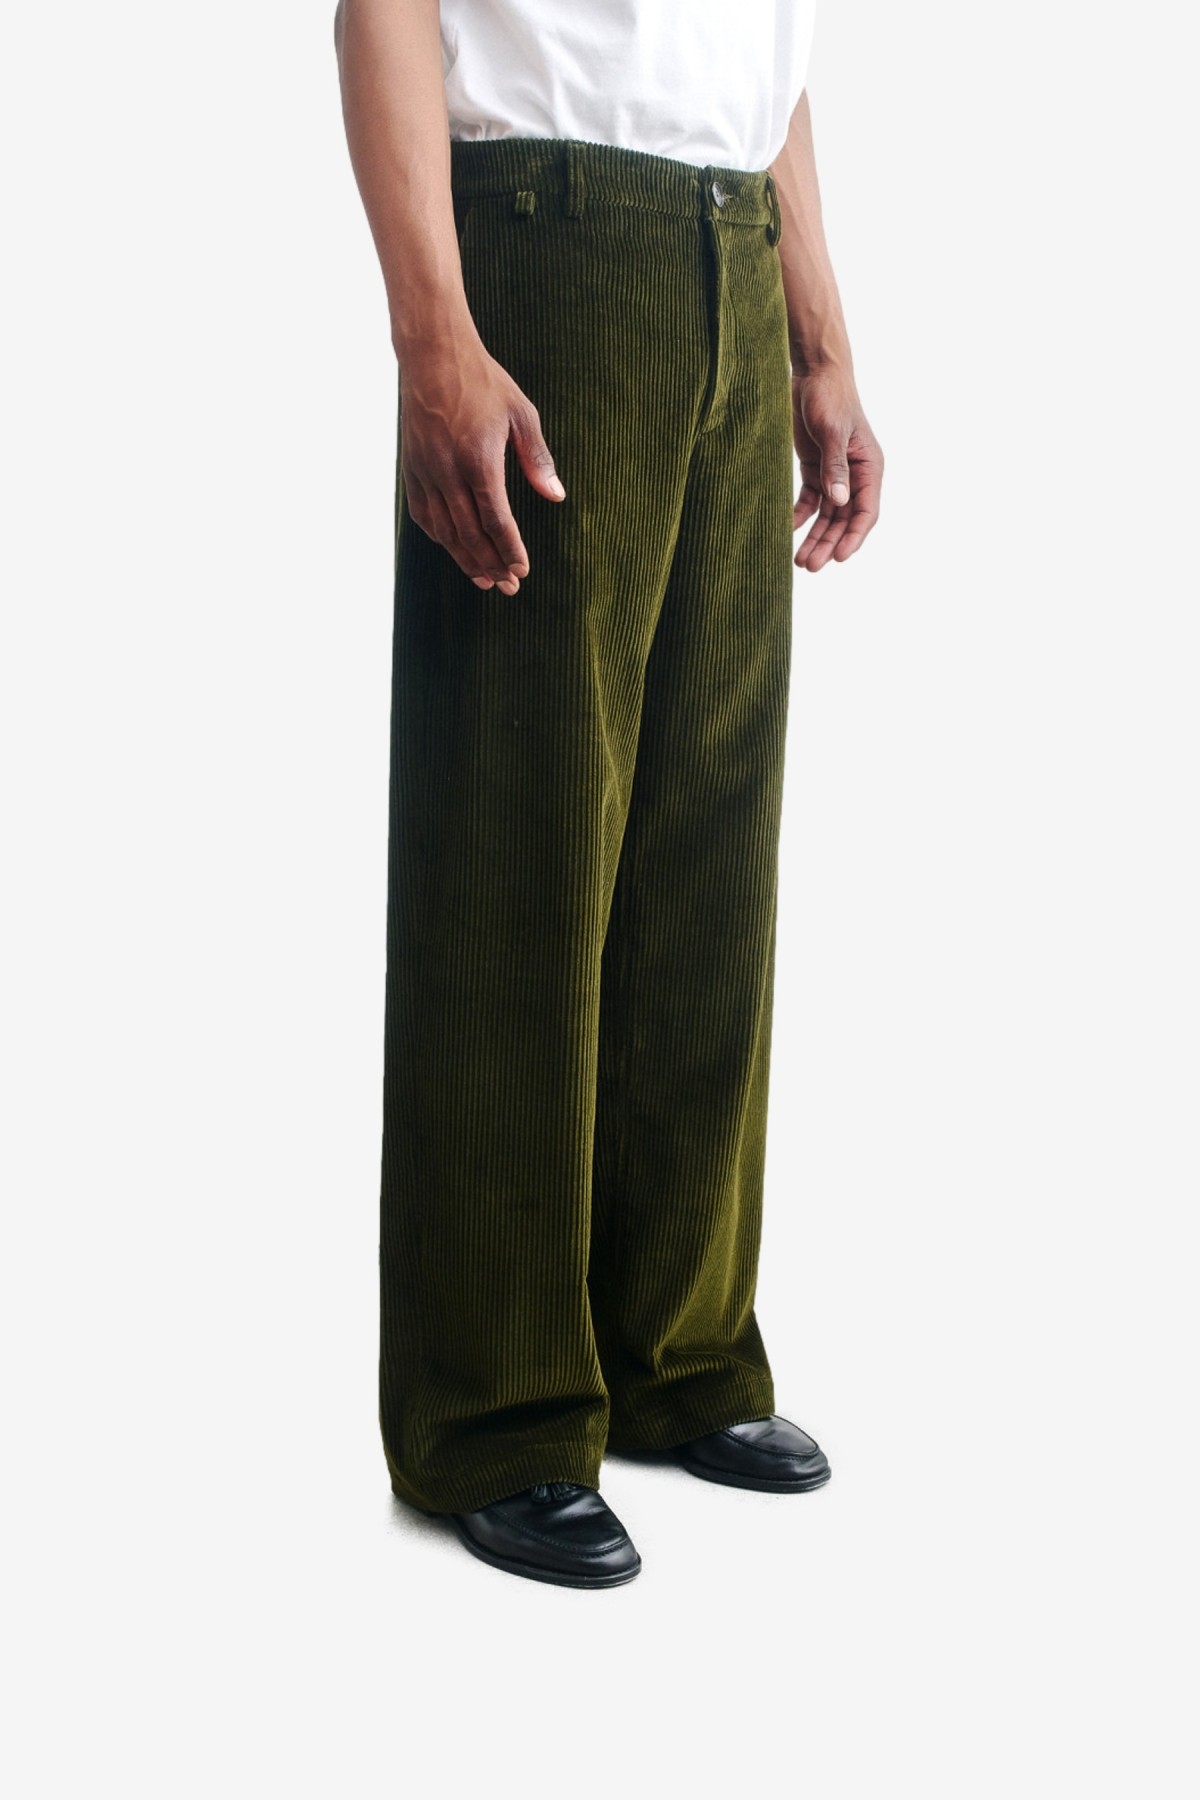 A Kind of Guise Vali Chino in Olive Corduroy